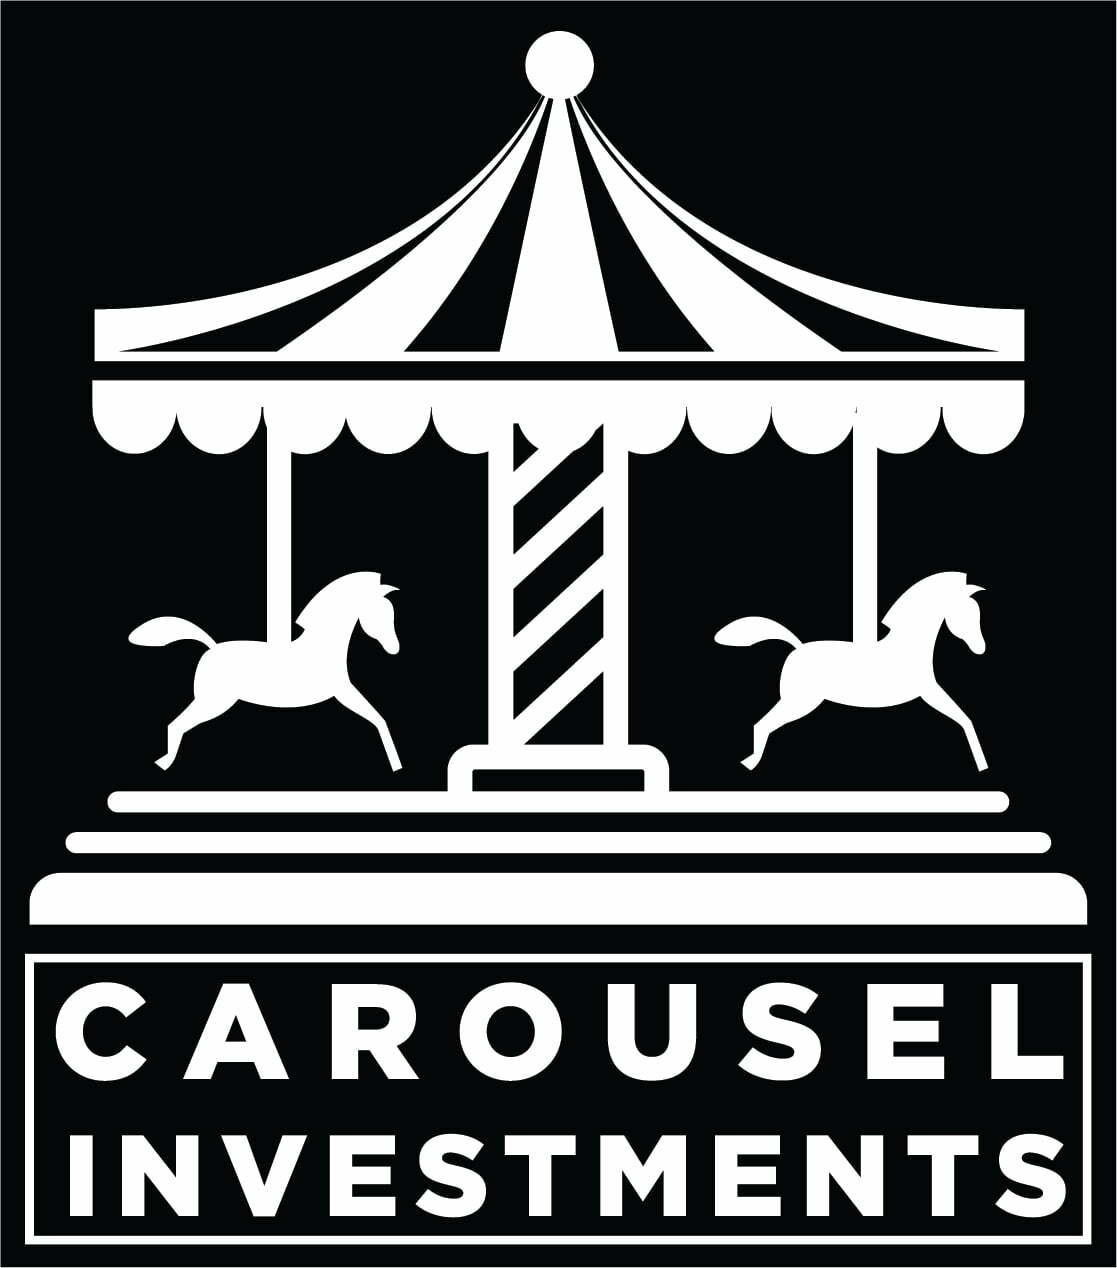 Carousel Investments